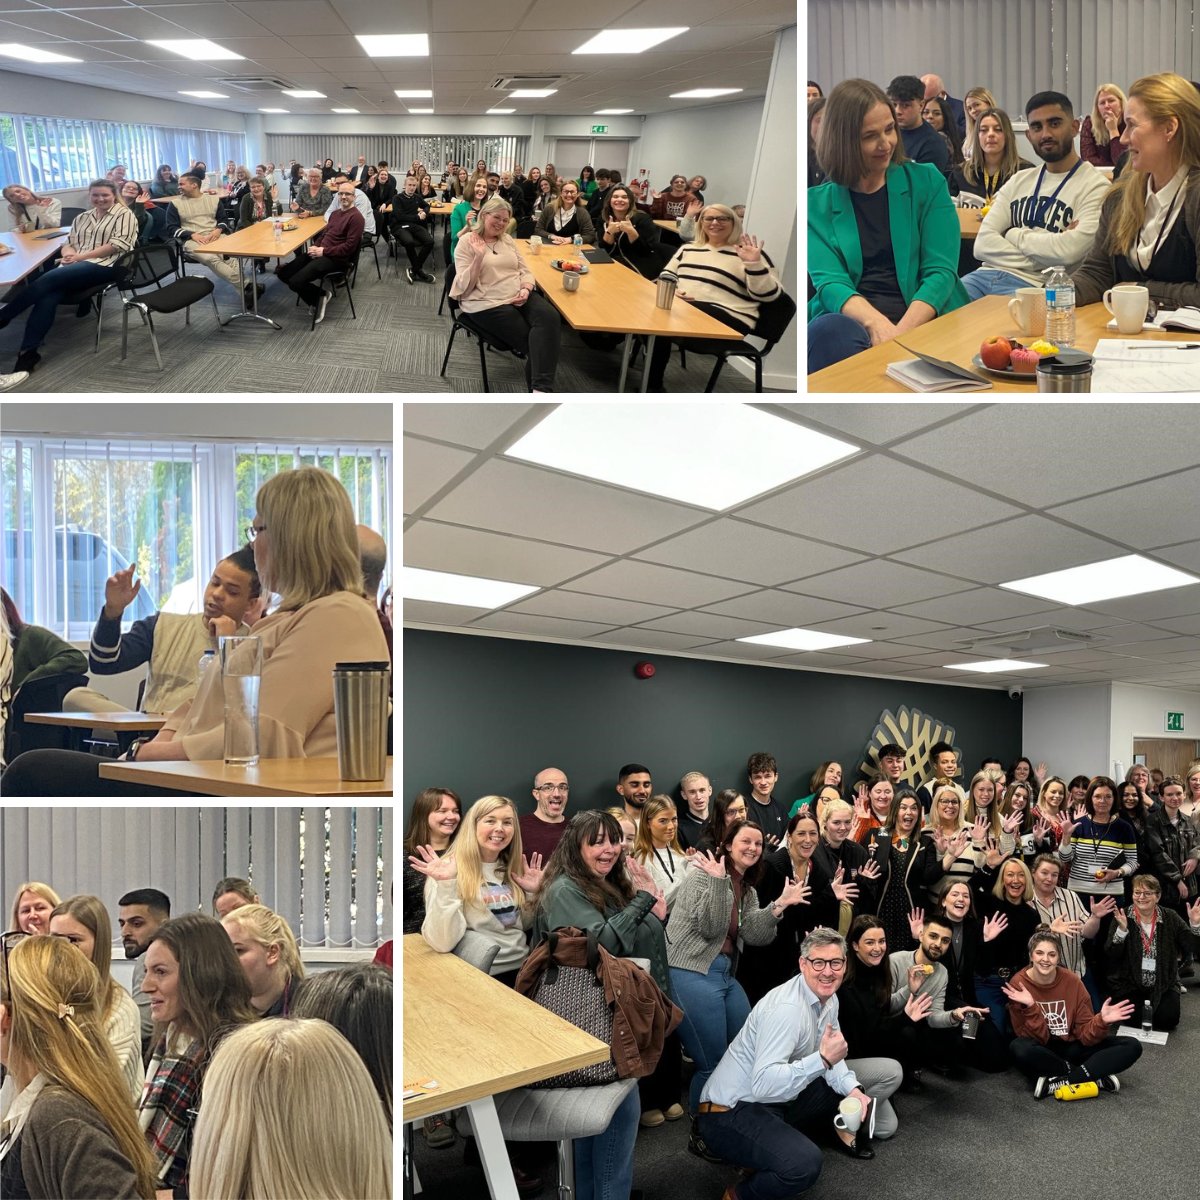 Today was our quarterly 'Communicake' session with staff across the business where we talked about KPIs, goals for the year, honesty, authenticity, integrity and 'love'...and of course ate cake. Afterwards staff said they felt positive, connected, inspired, content and valued 🤗